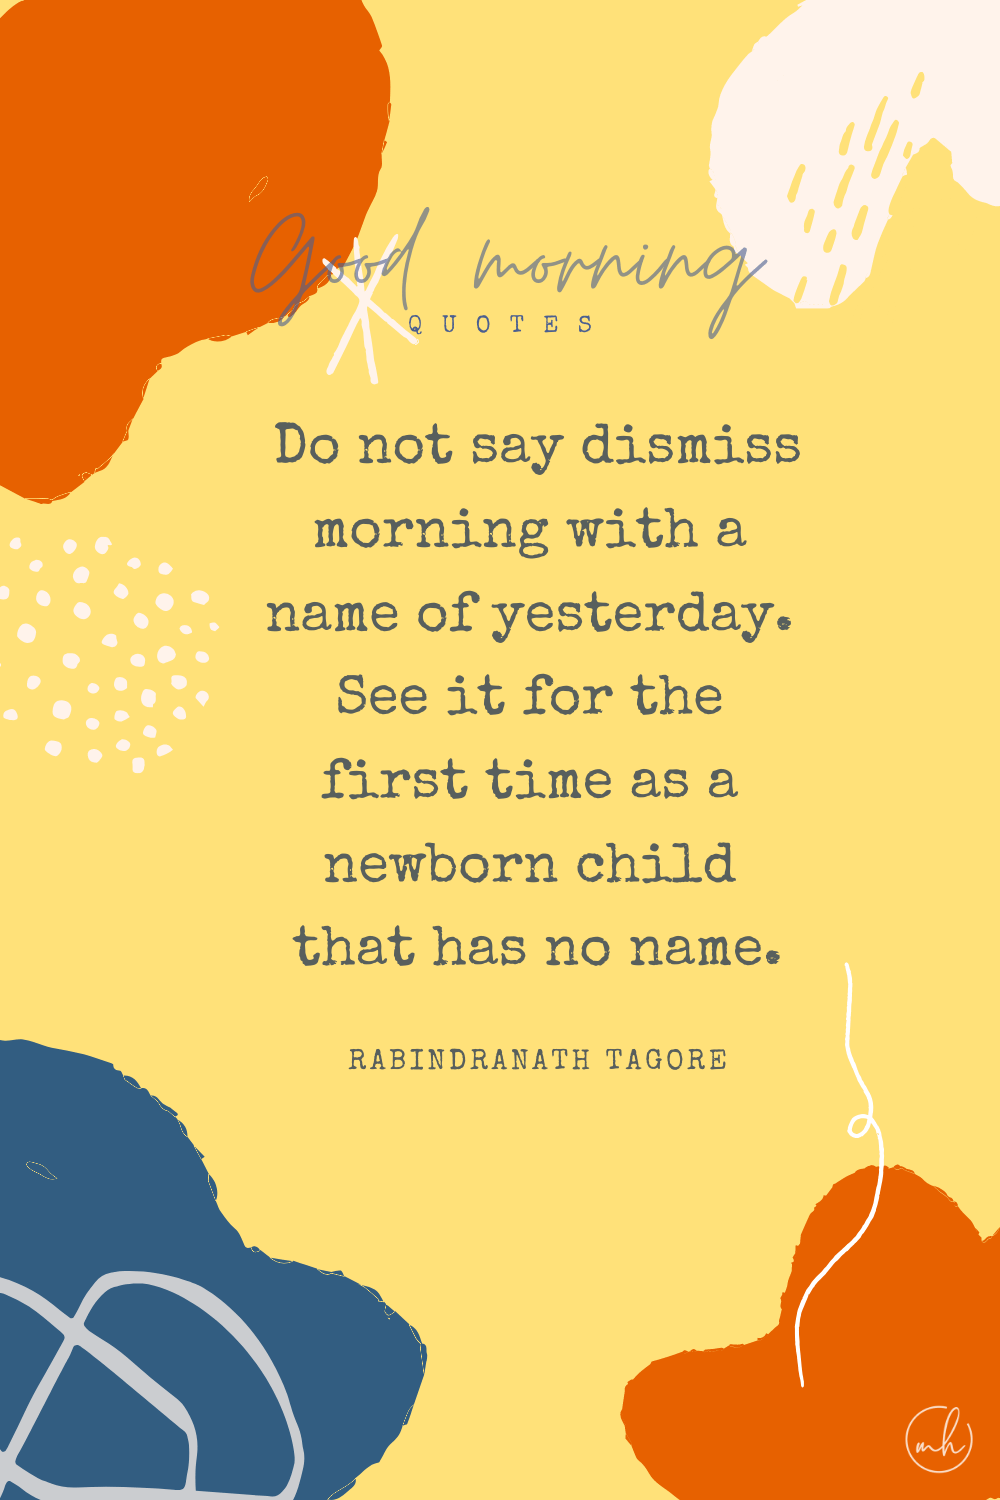 "Do not say, 'It is morning,' and dismiss it with a name of yesterday. See it for the first time as a newborn child that has no name." – Rabindranath Tagore